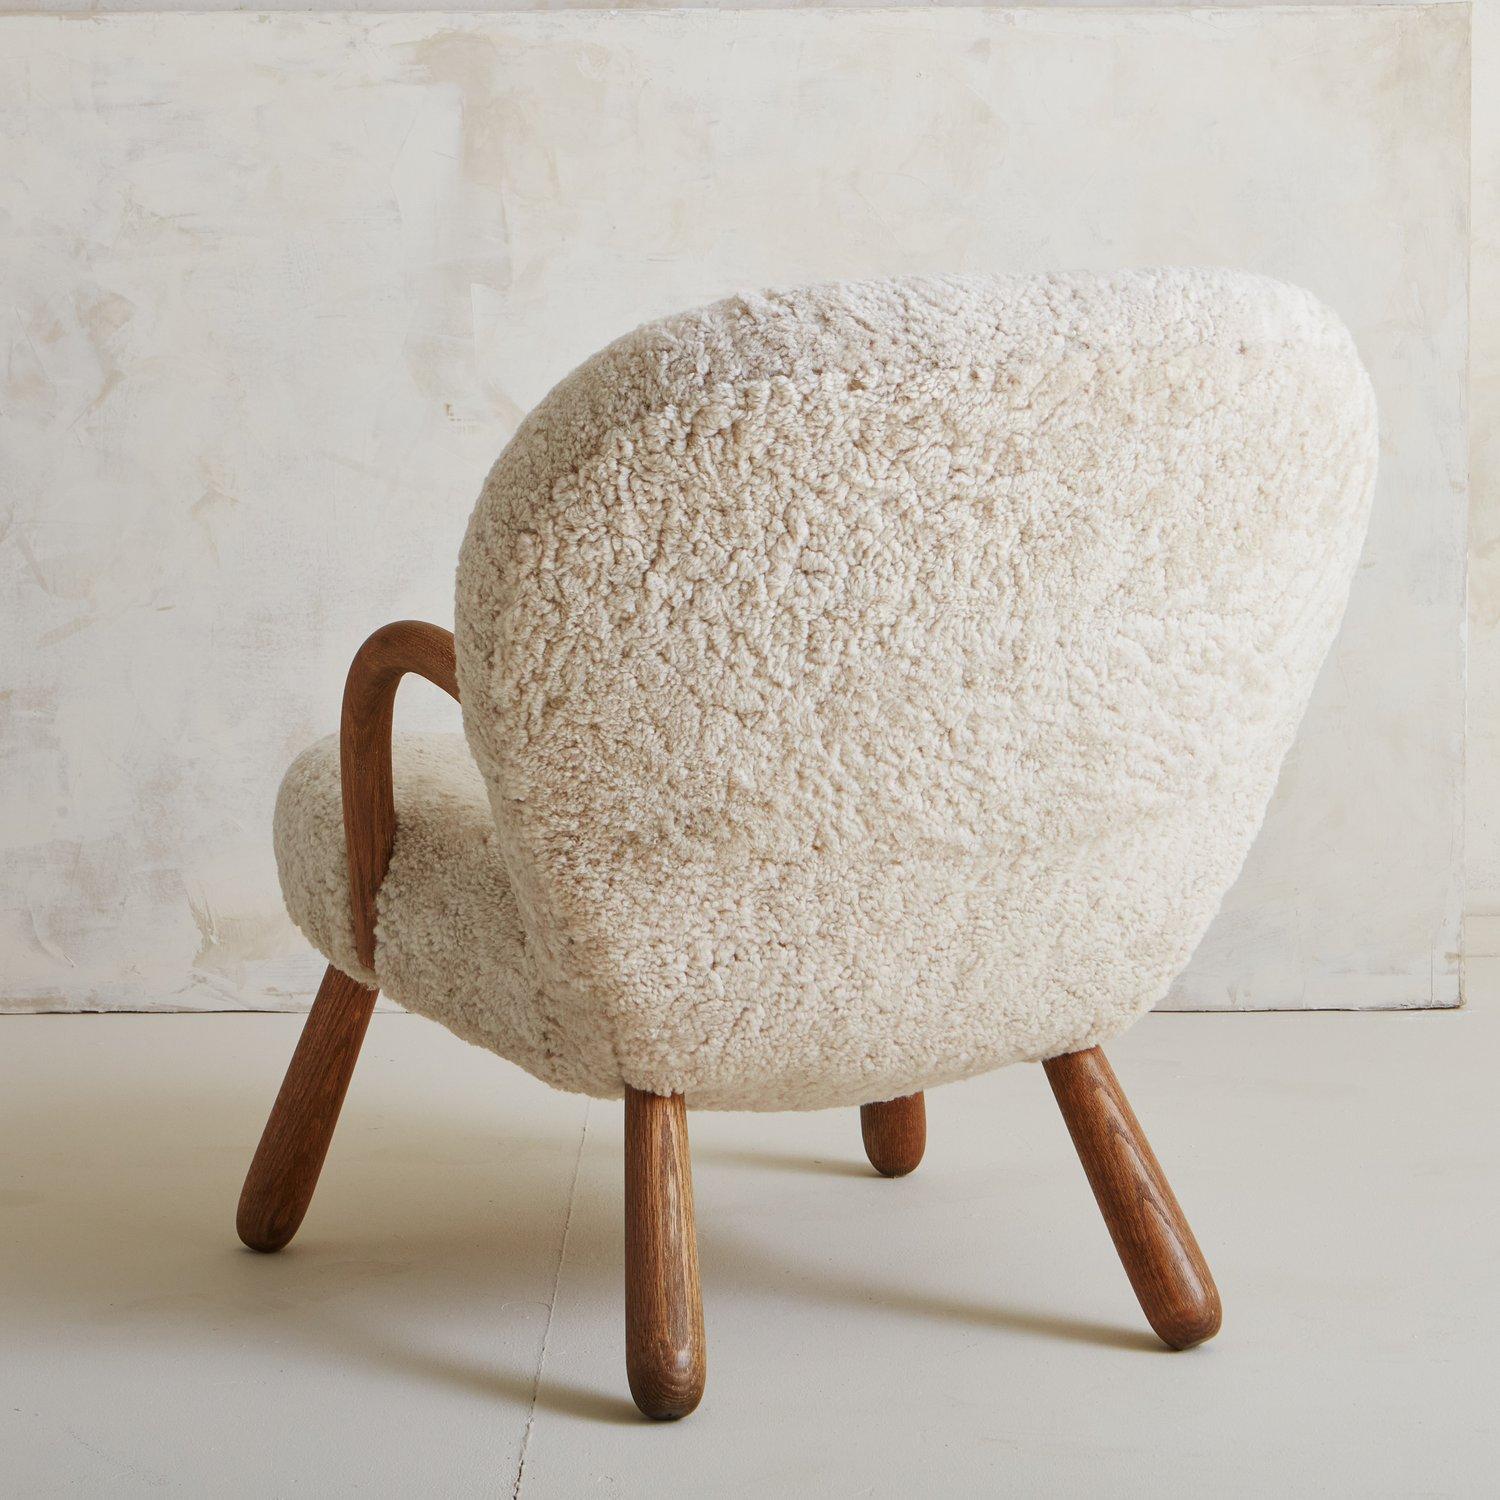 Mid-Century Modern Pair of Vintage Clam Chairs in Shearling by Philip Arctander, Denmark 1944